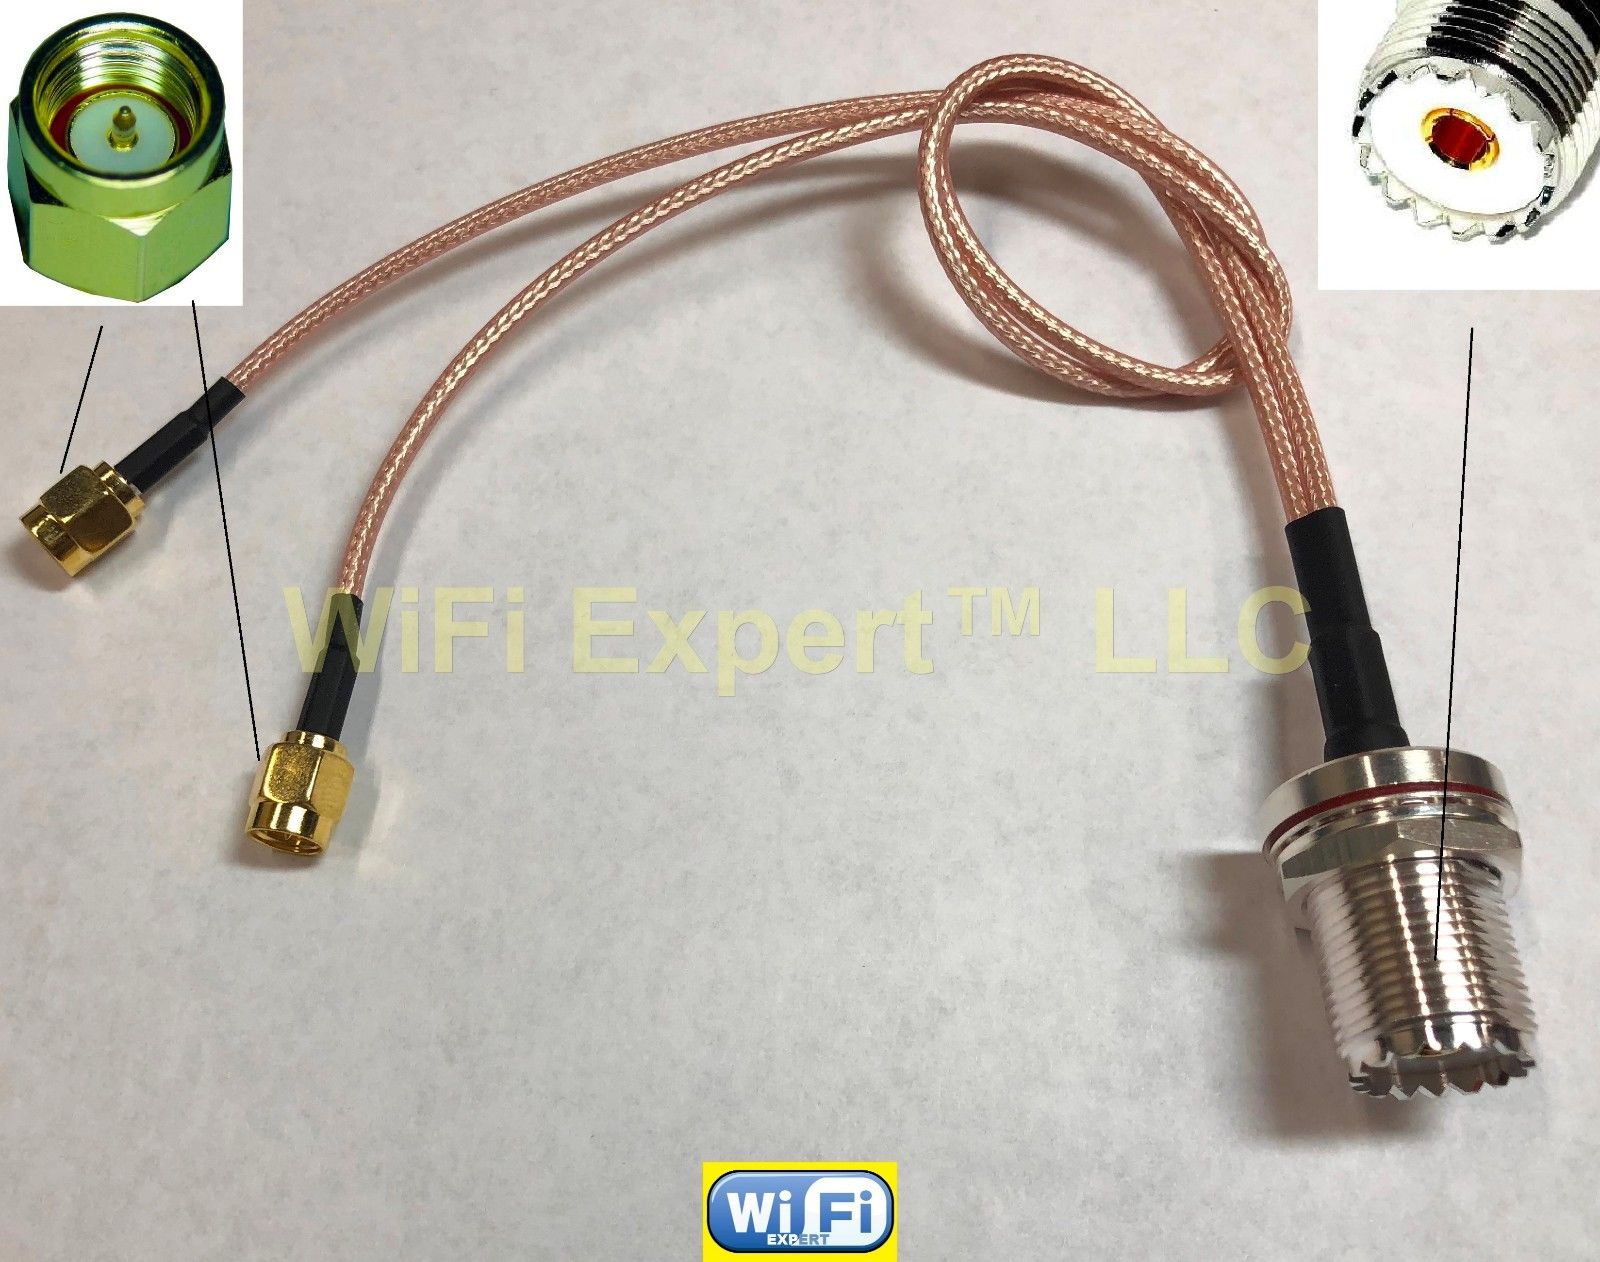 1x N Female Bulkhead to TNC Male or Female WiFi Pigtail RG316 4-20 INCH Cable US 